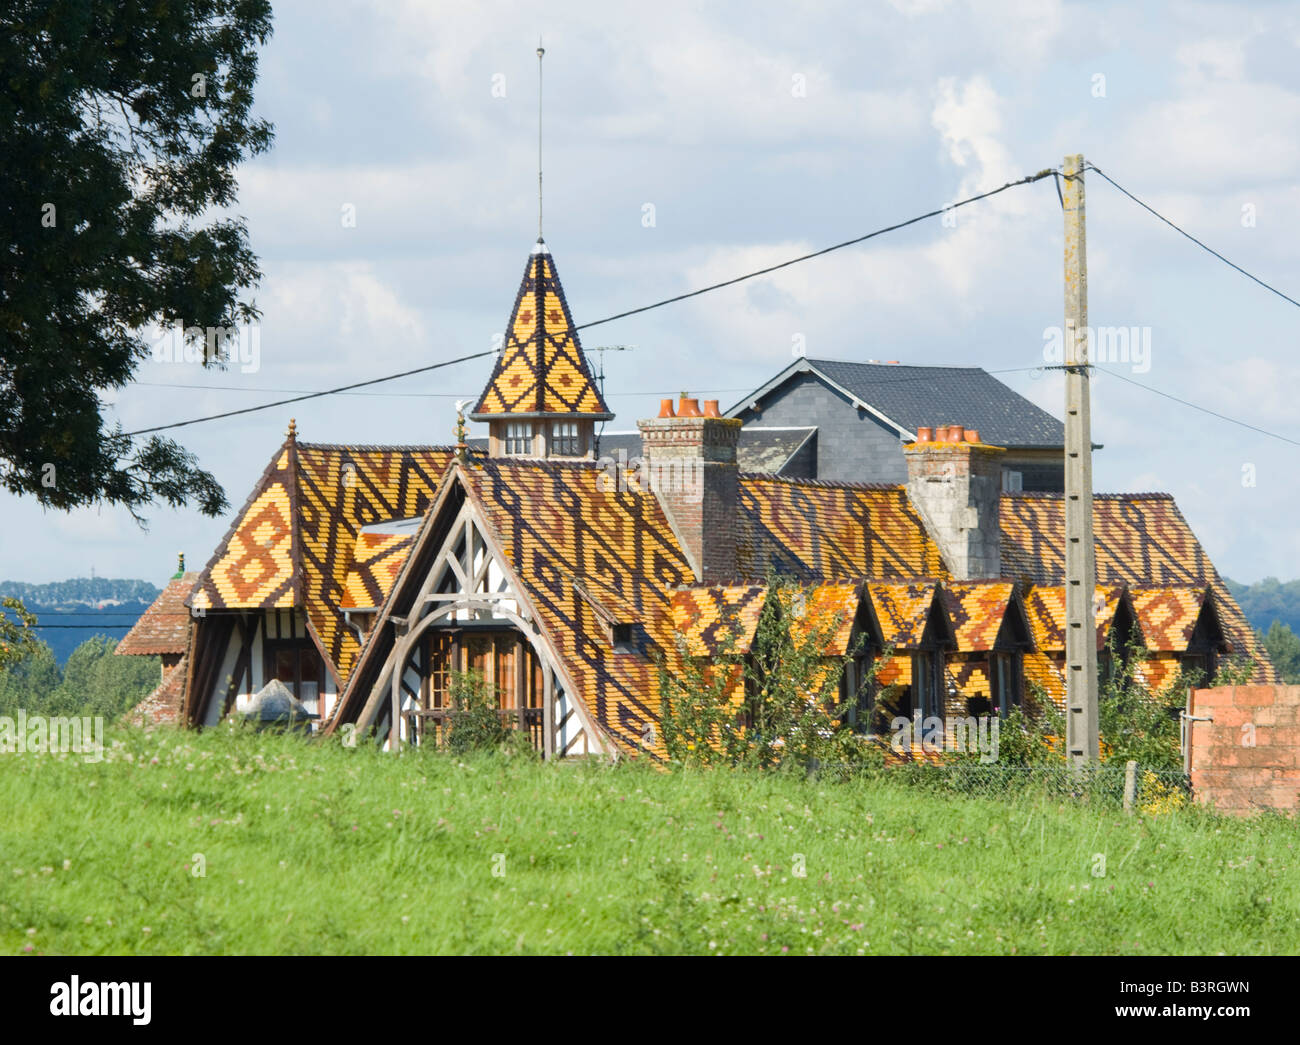 Unusual patterned tile roof in Upper Normandy, France Stock Photo